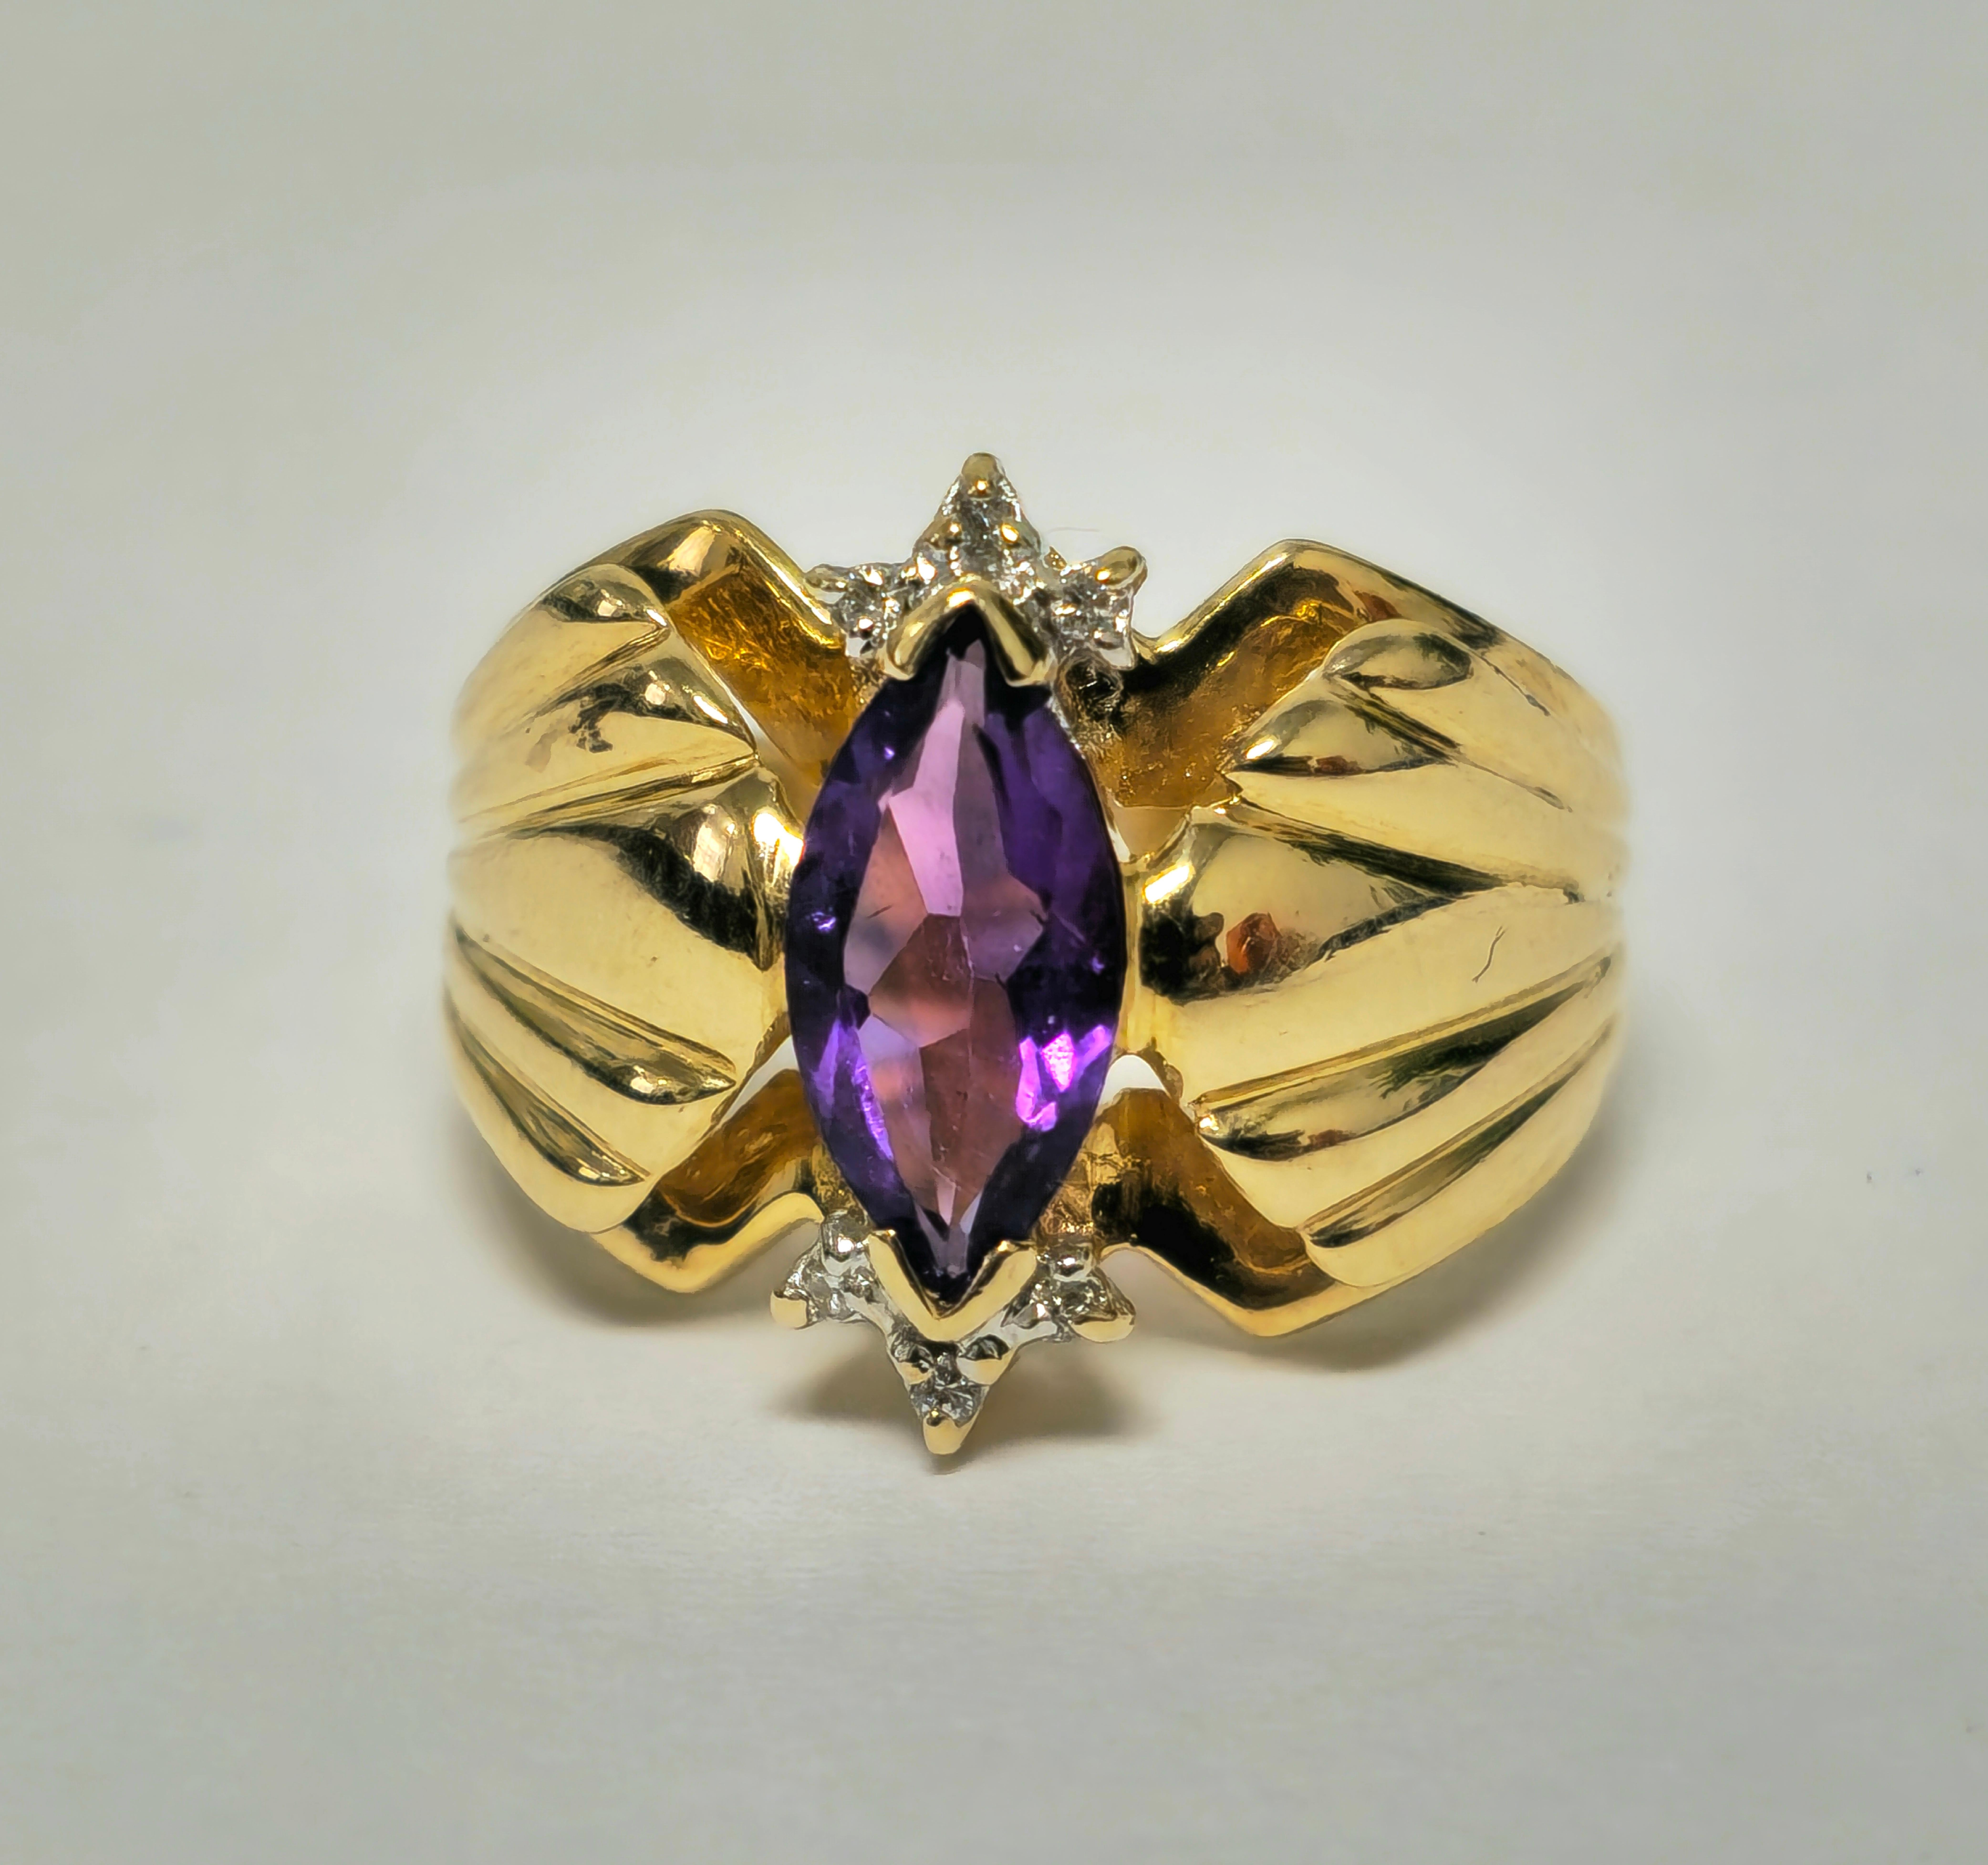 Victorian Style 2.30 Carat Amethyst & Diamond Cocktail Ring 14k Gold In Excellent Condition For Sale In Miami, FL